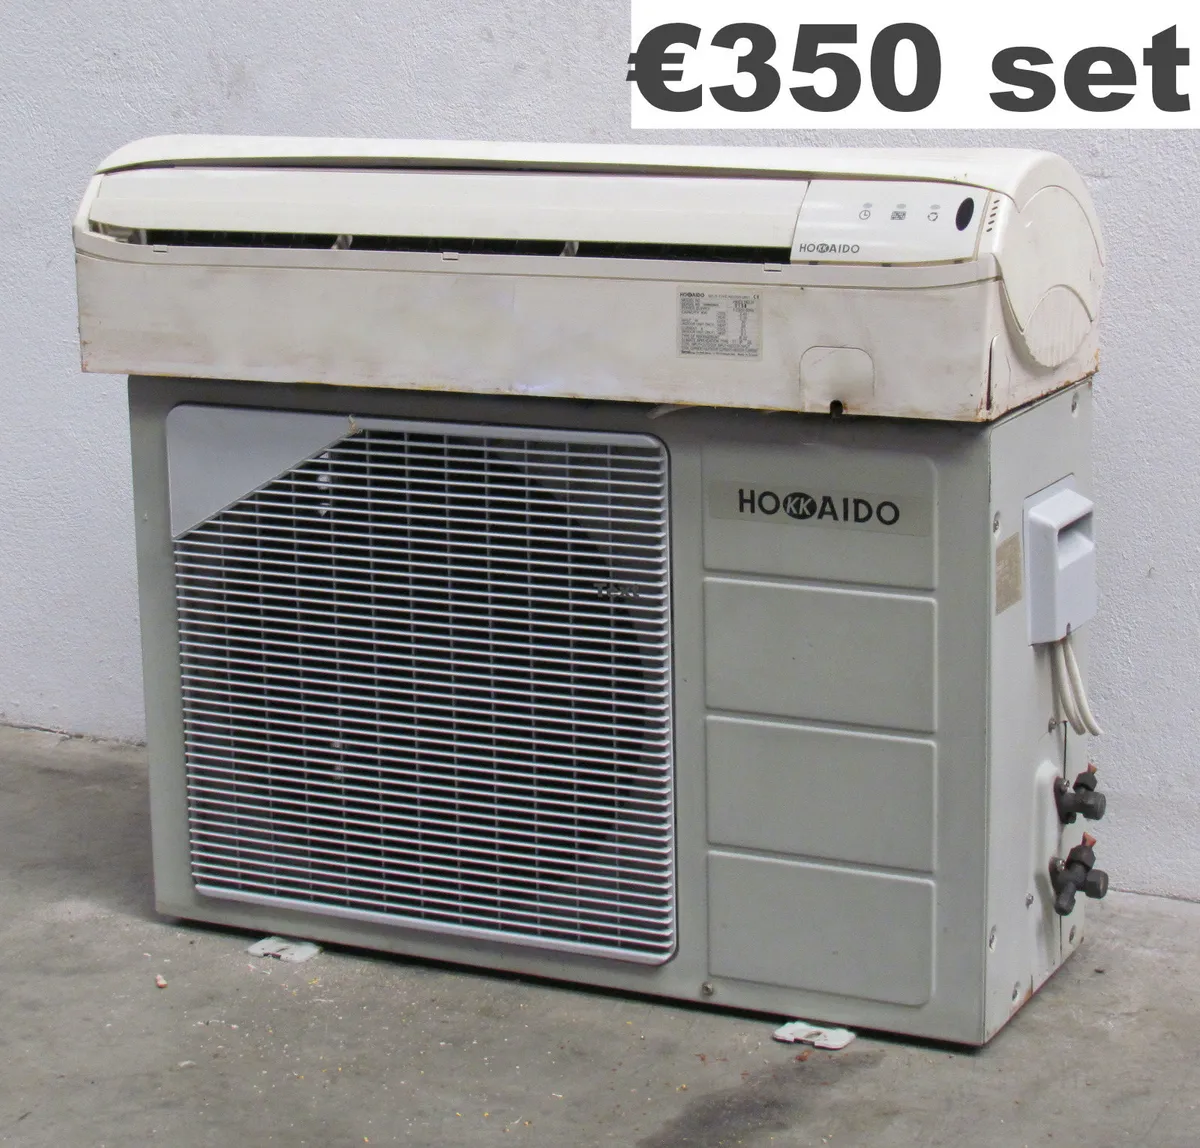 Air conditioner units, spares & accessoriers - Image 1